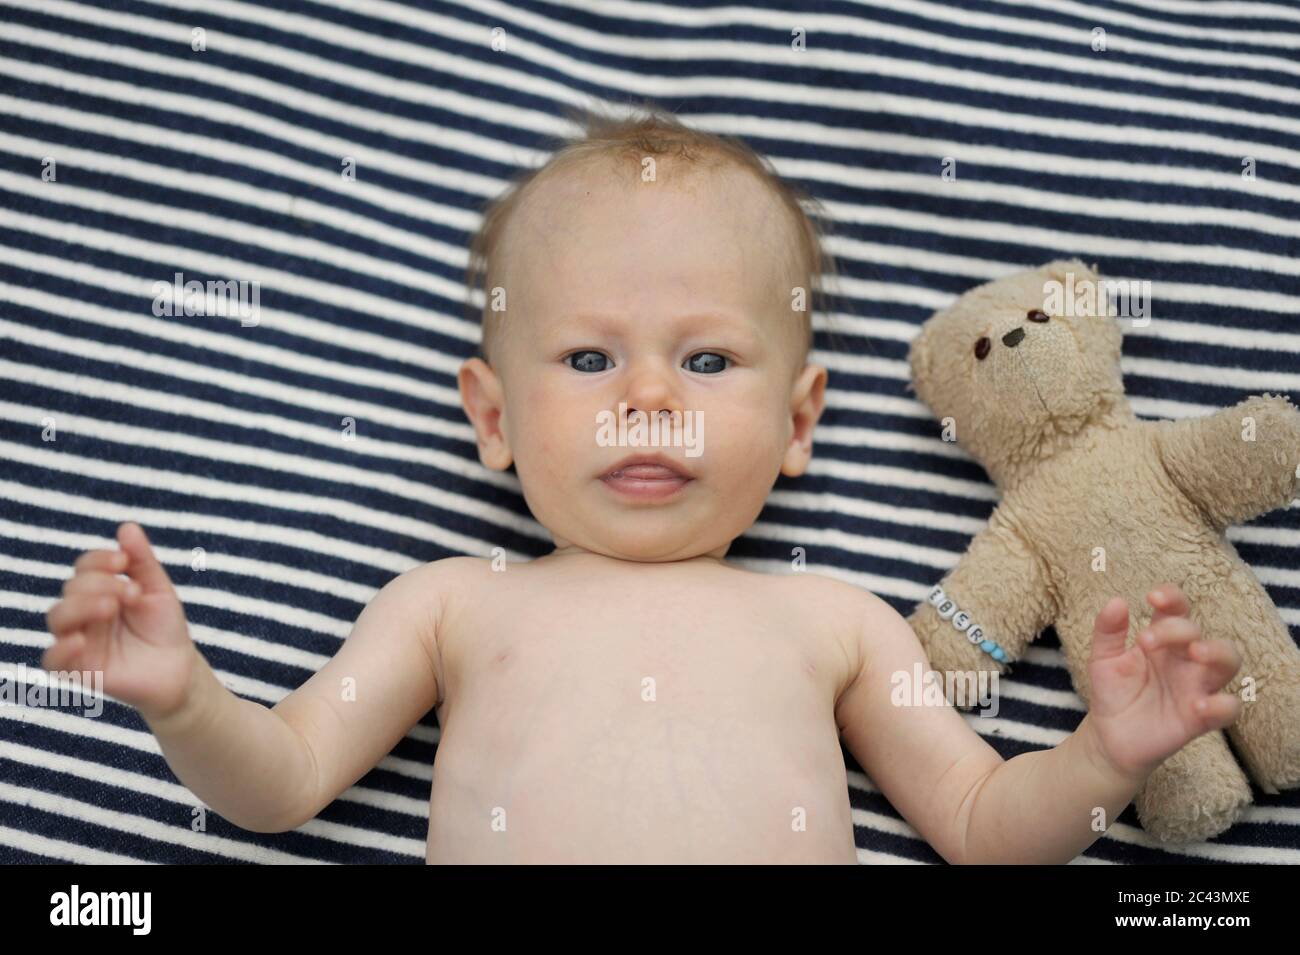 Baby is lying on a blanket with a teddy bear Stock Photo